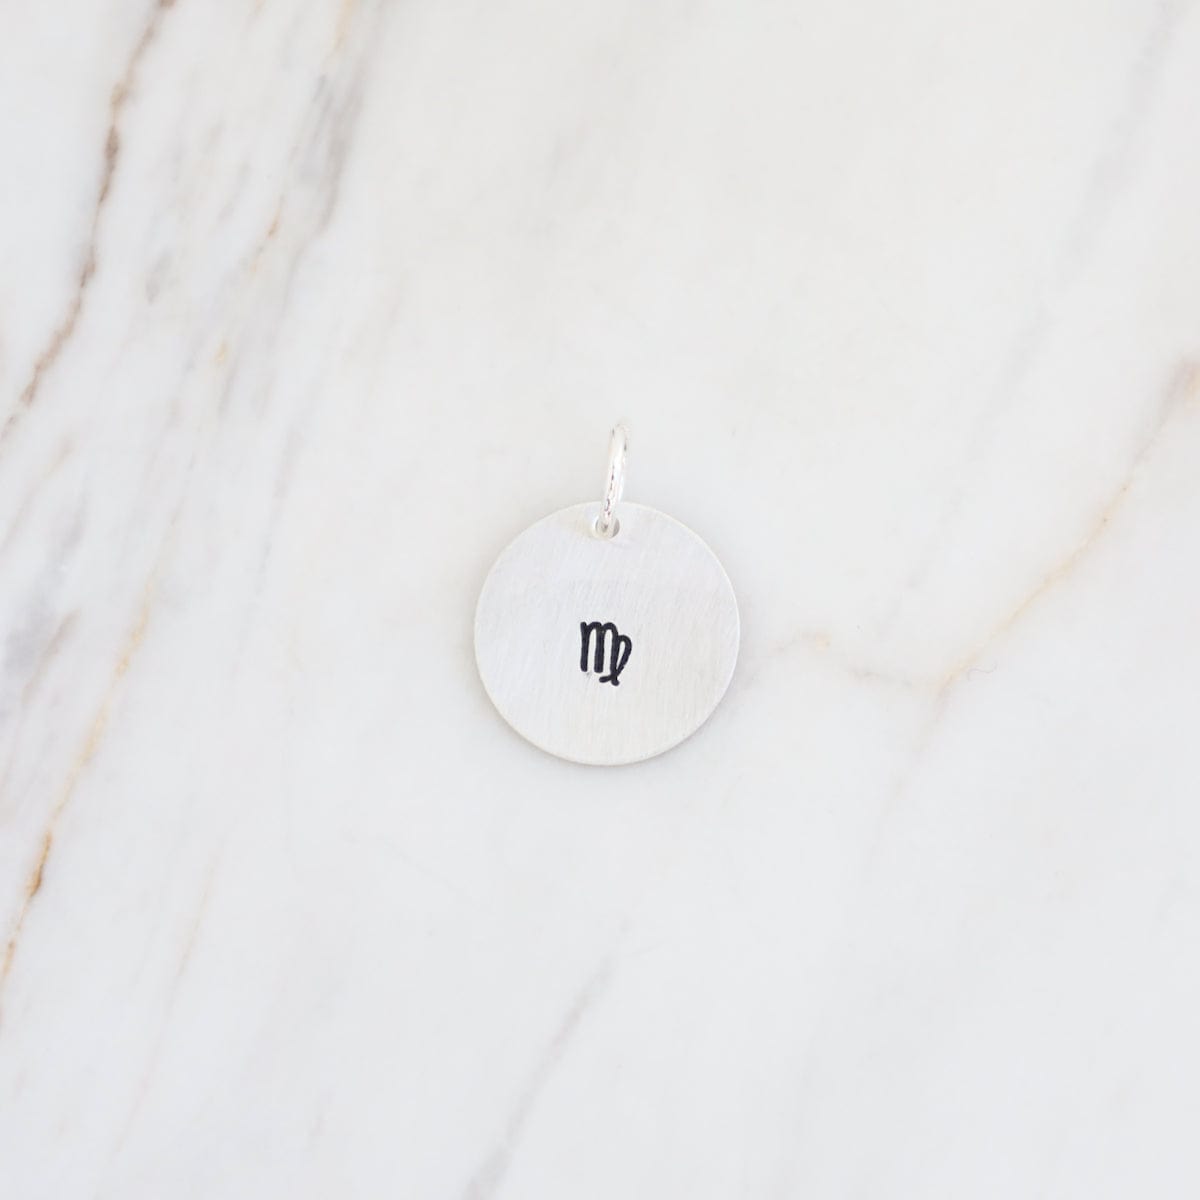 CHM Small Sterling Silver Hand Stamped Zodiac Charm